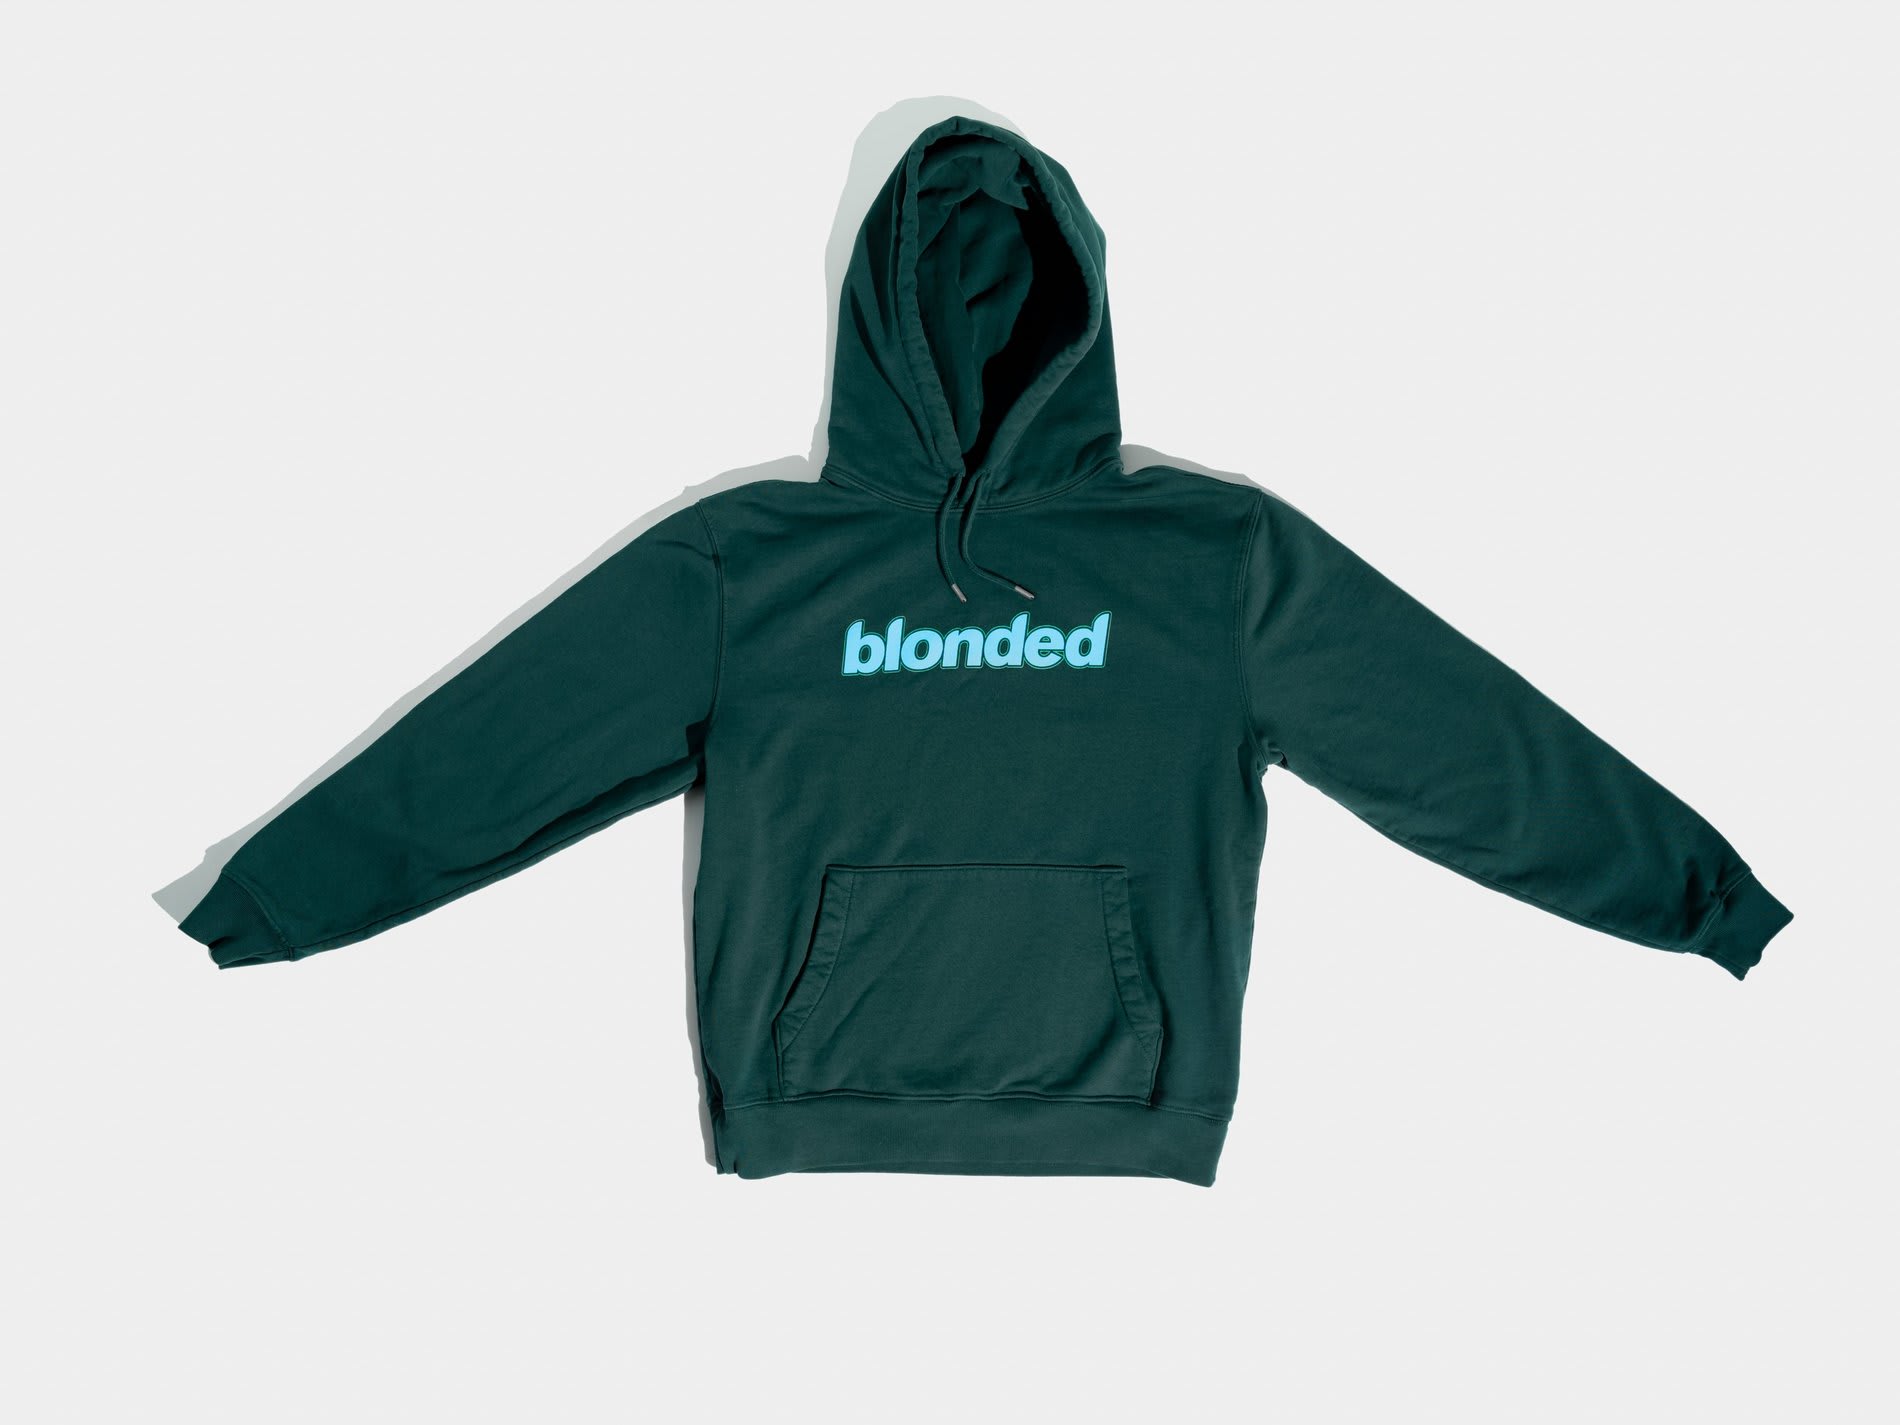 Complex Best Style Releases Blonded Hoodie by Frank Ocean